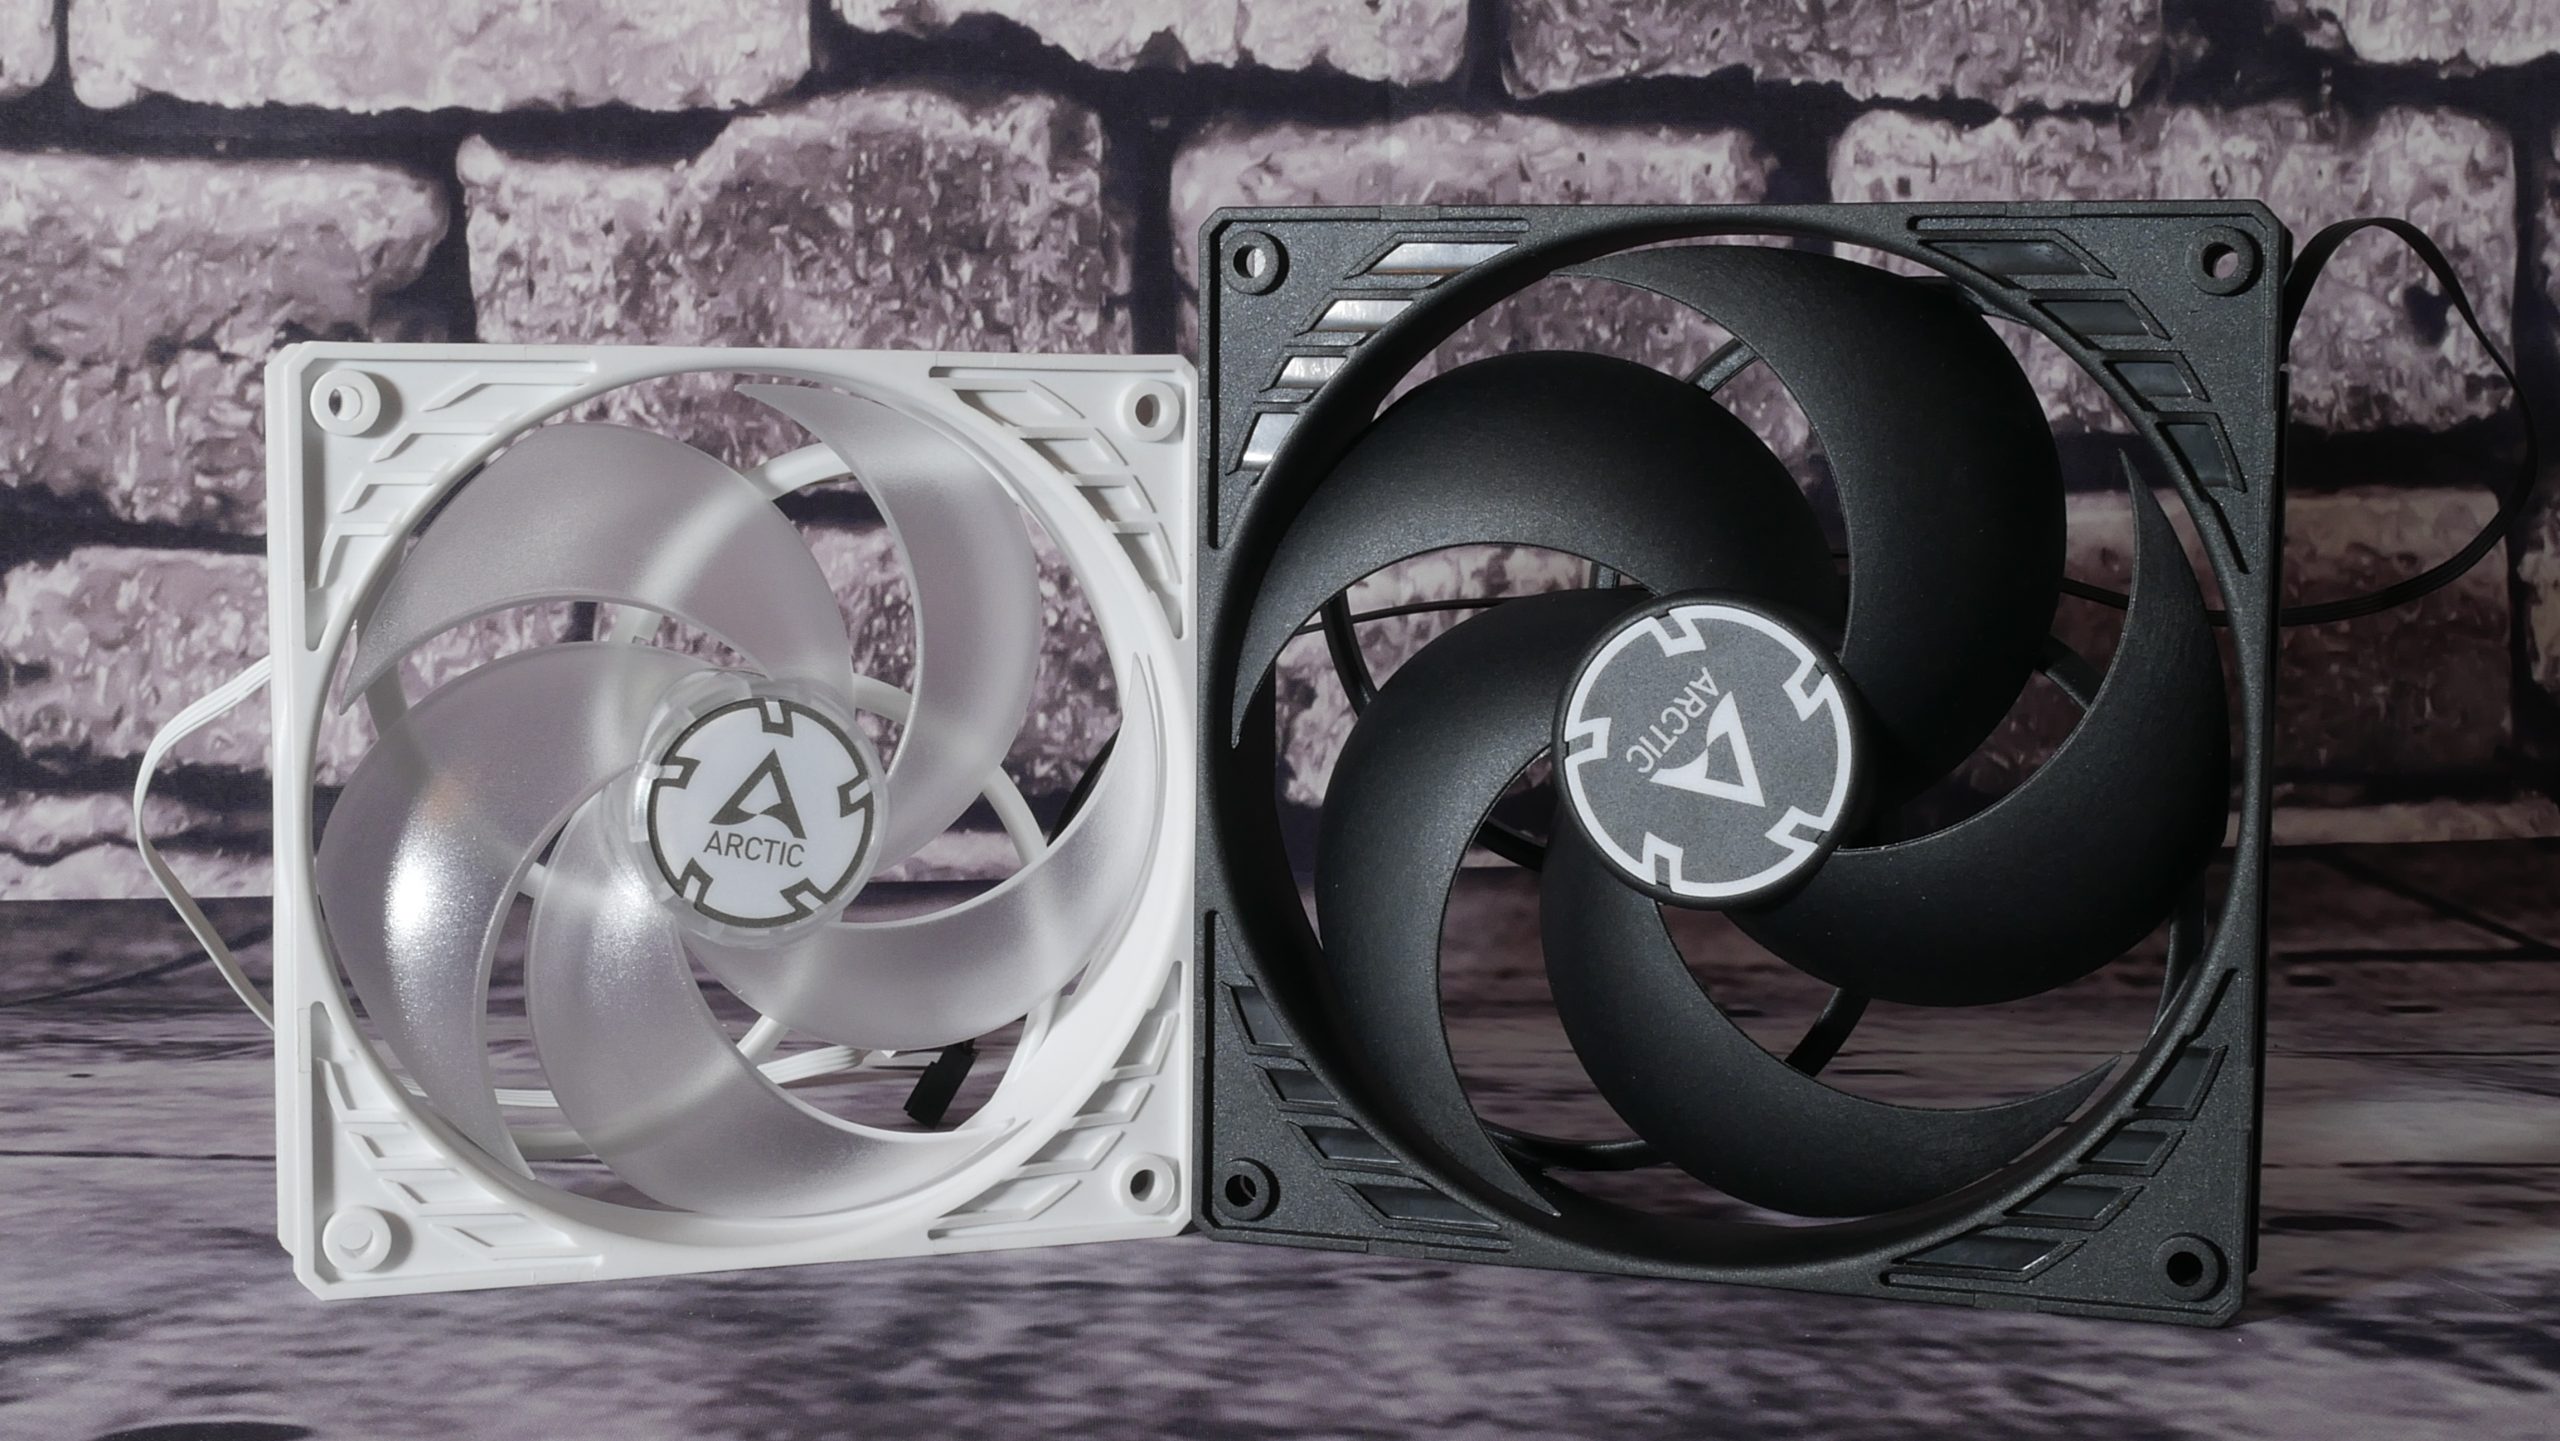 Unpleasant noise and humming as a case fans: Arctic P12 vs. P14 in